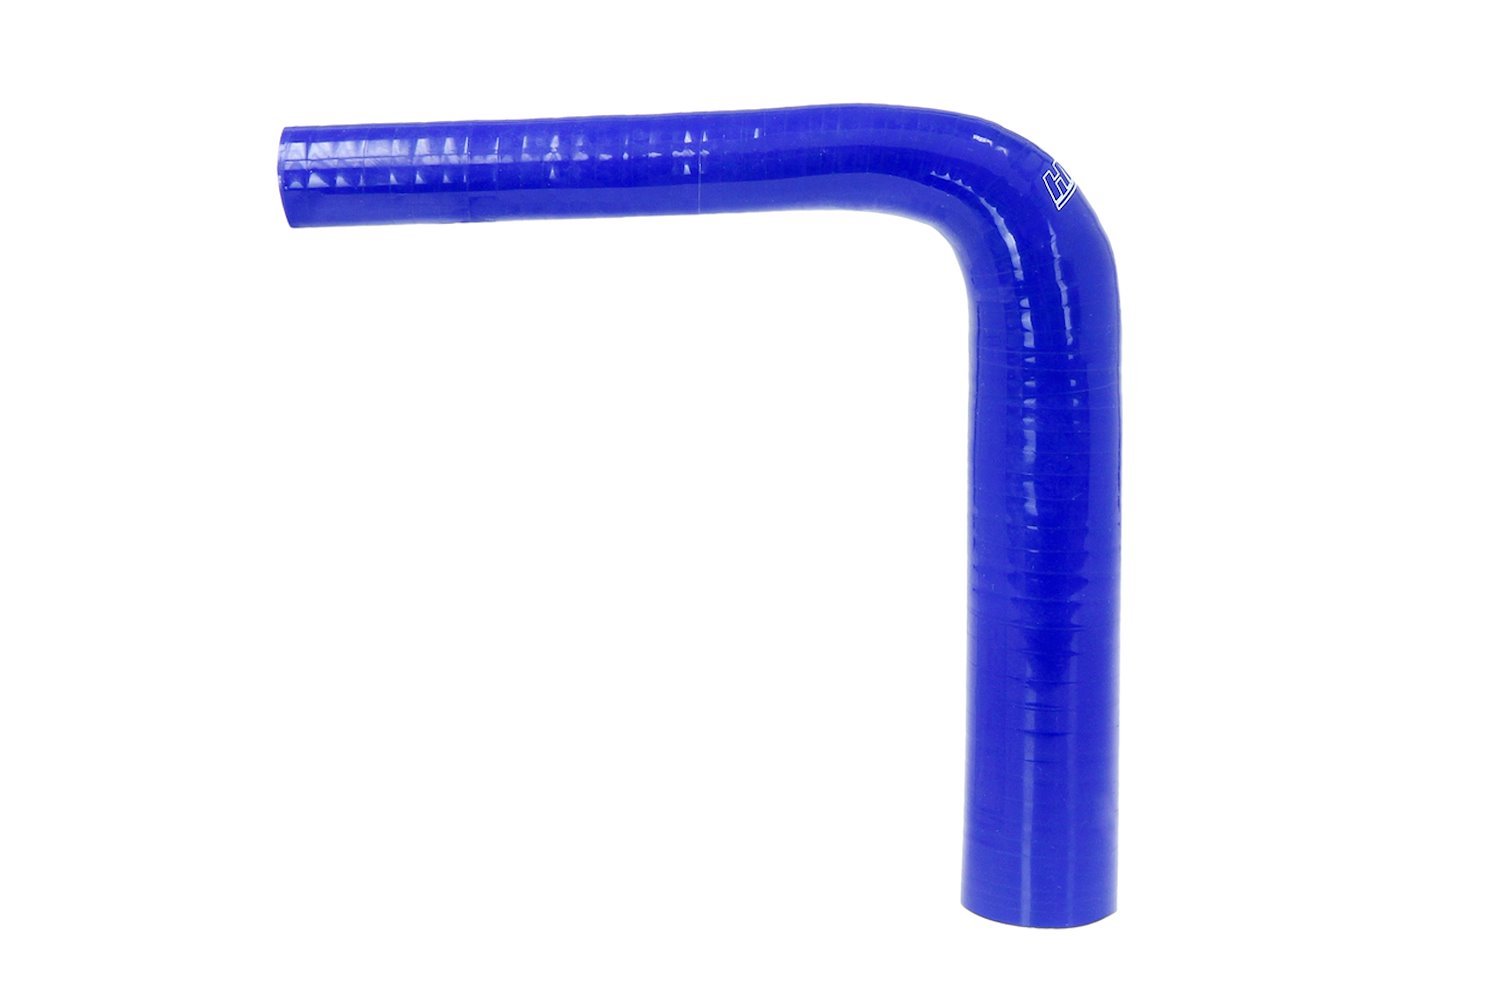 HTSER90-062-100-BLUE Silicone 90-Degree Elbow Hose, High-Temp 4-Ply Reinforced, 5/8 in. - 1 in. ID, Blue